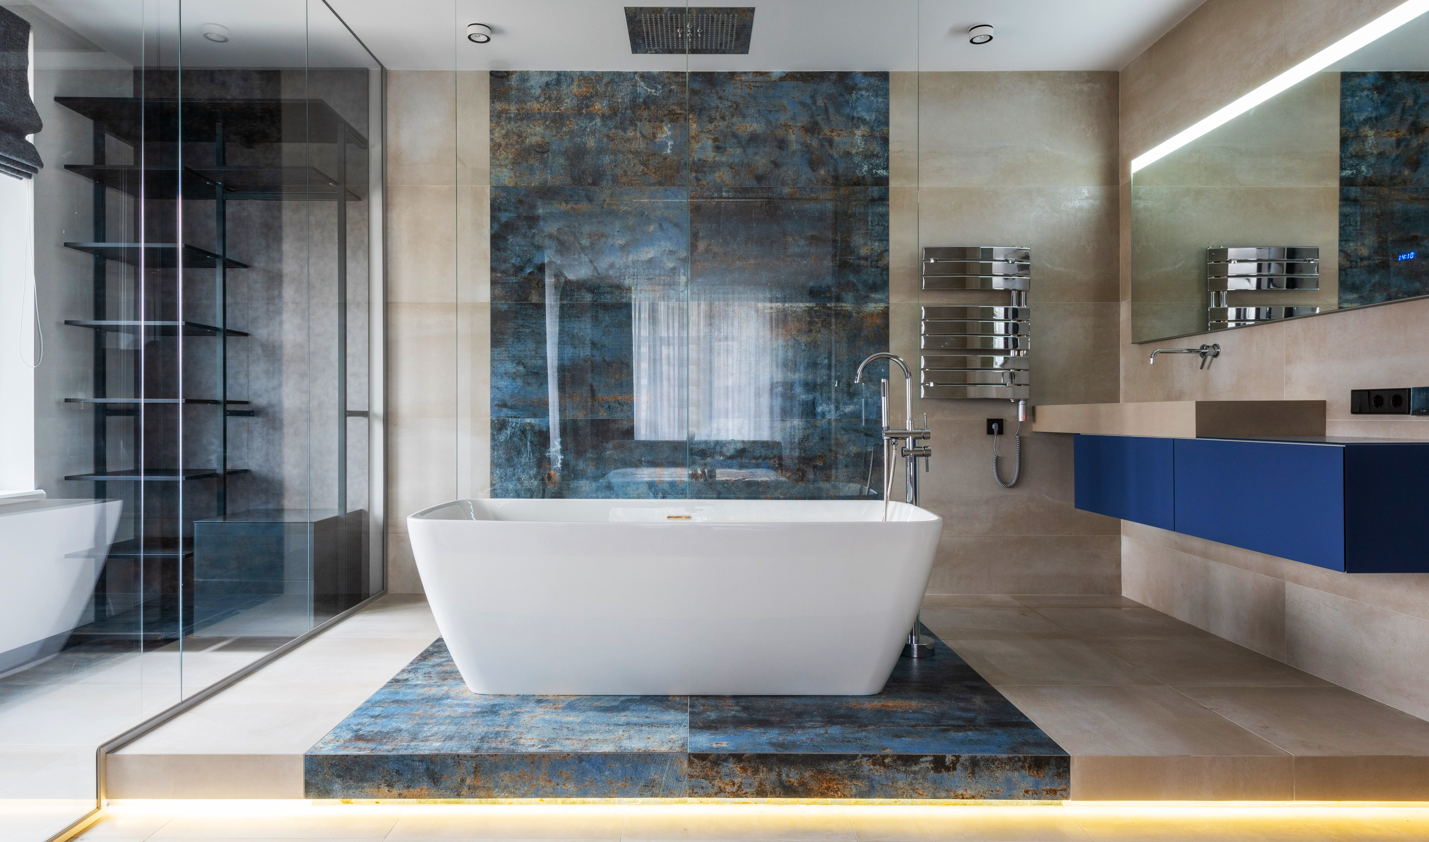 A wrapped installation is one of the newest trends in tile and makes for a stunning focal point in a contemporary bathroom.